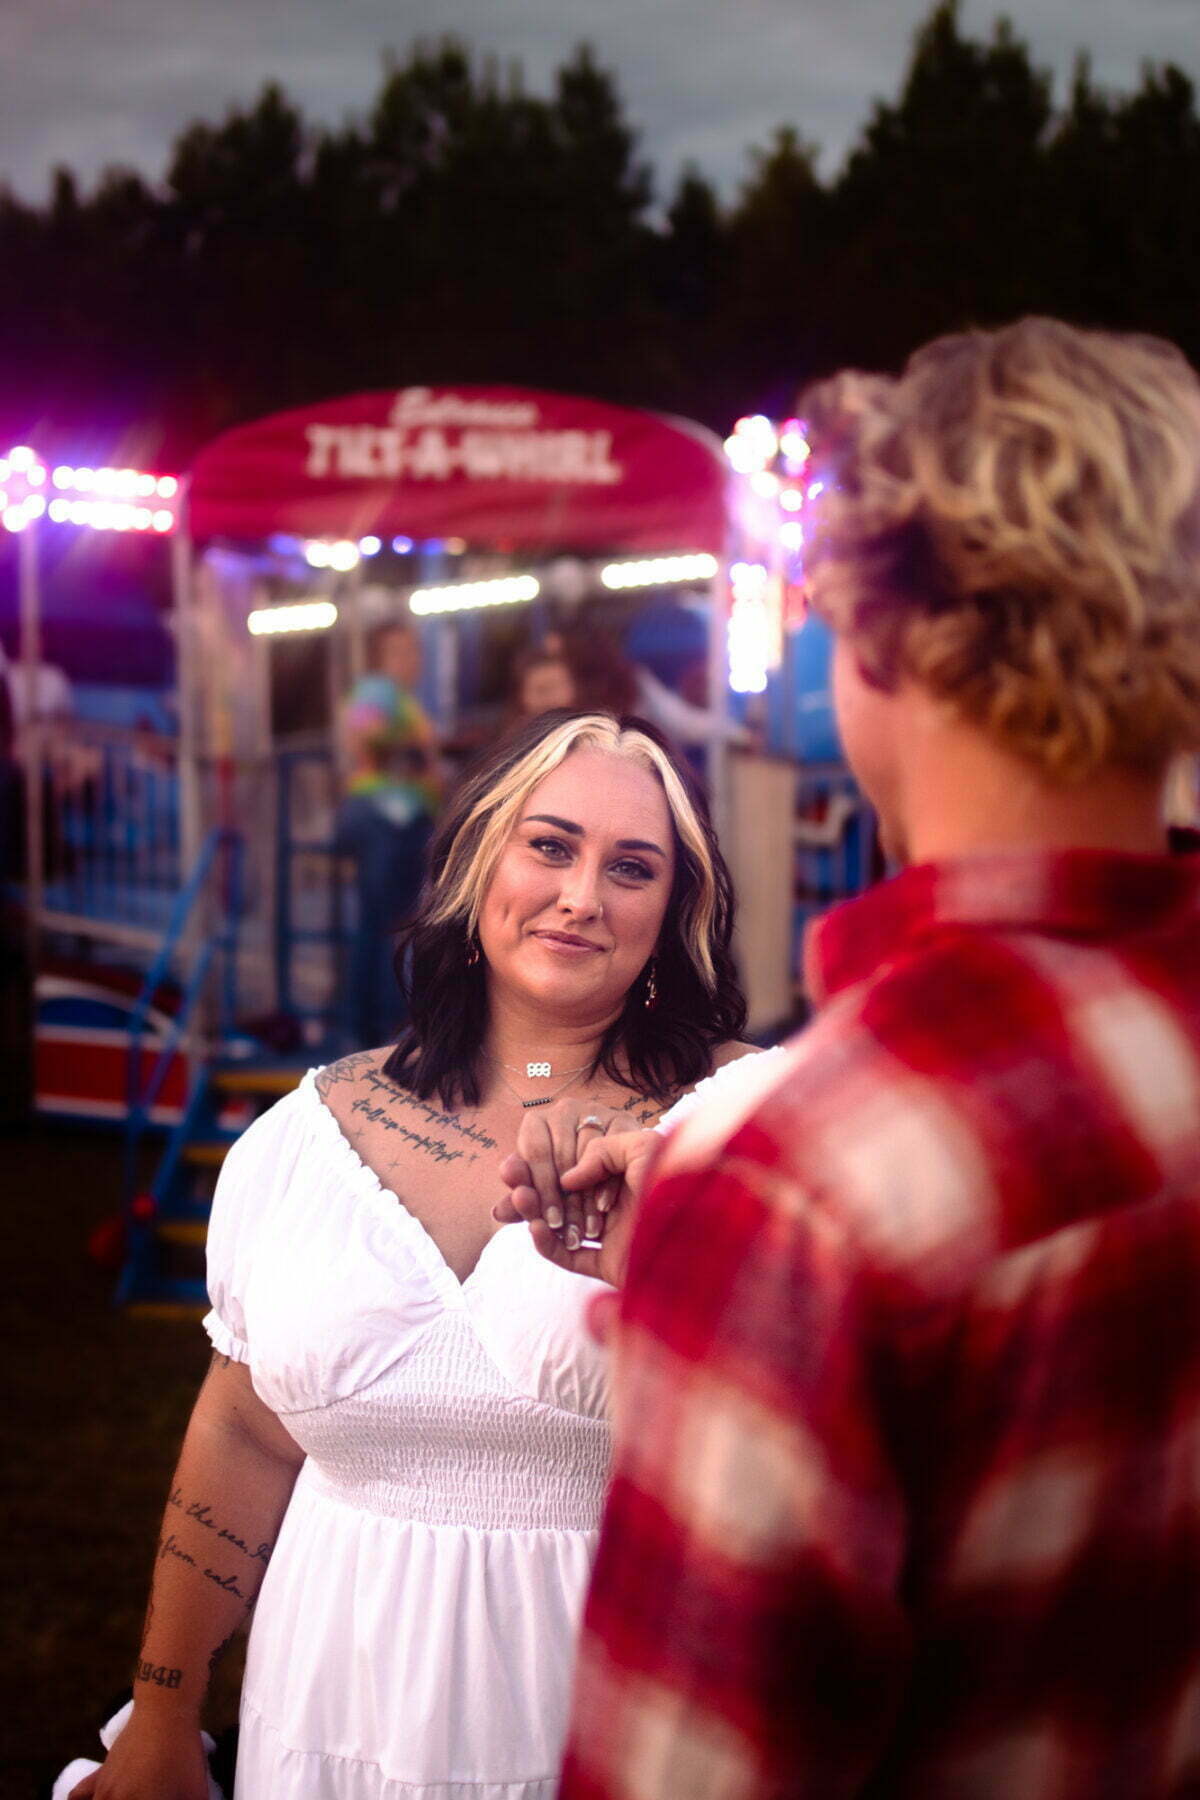 Columbus county fair engagement photography session in Whiteville, NC.